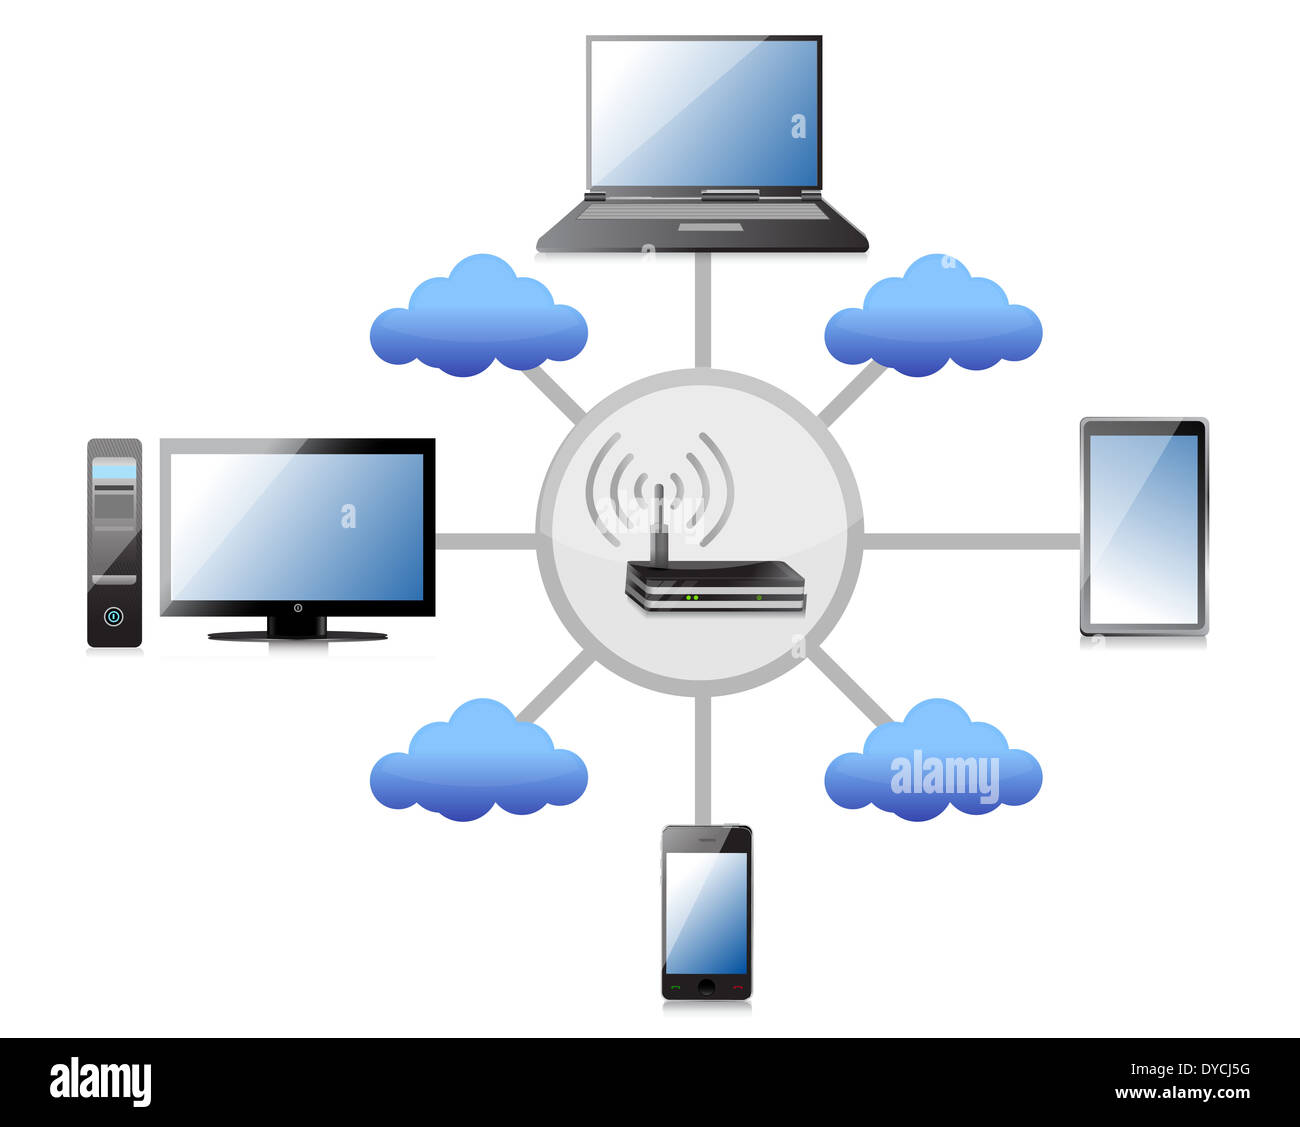 wifi network concept illustration design over a white background Stock Photo